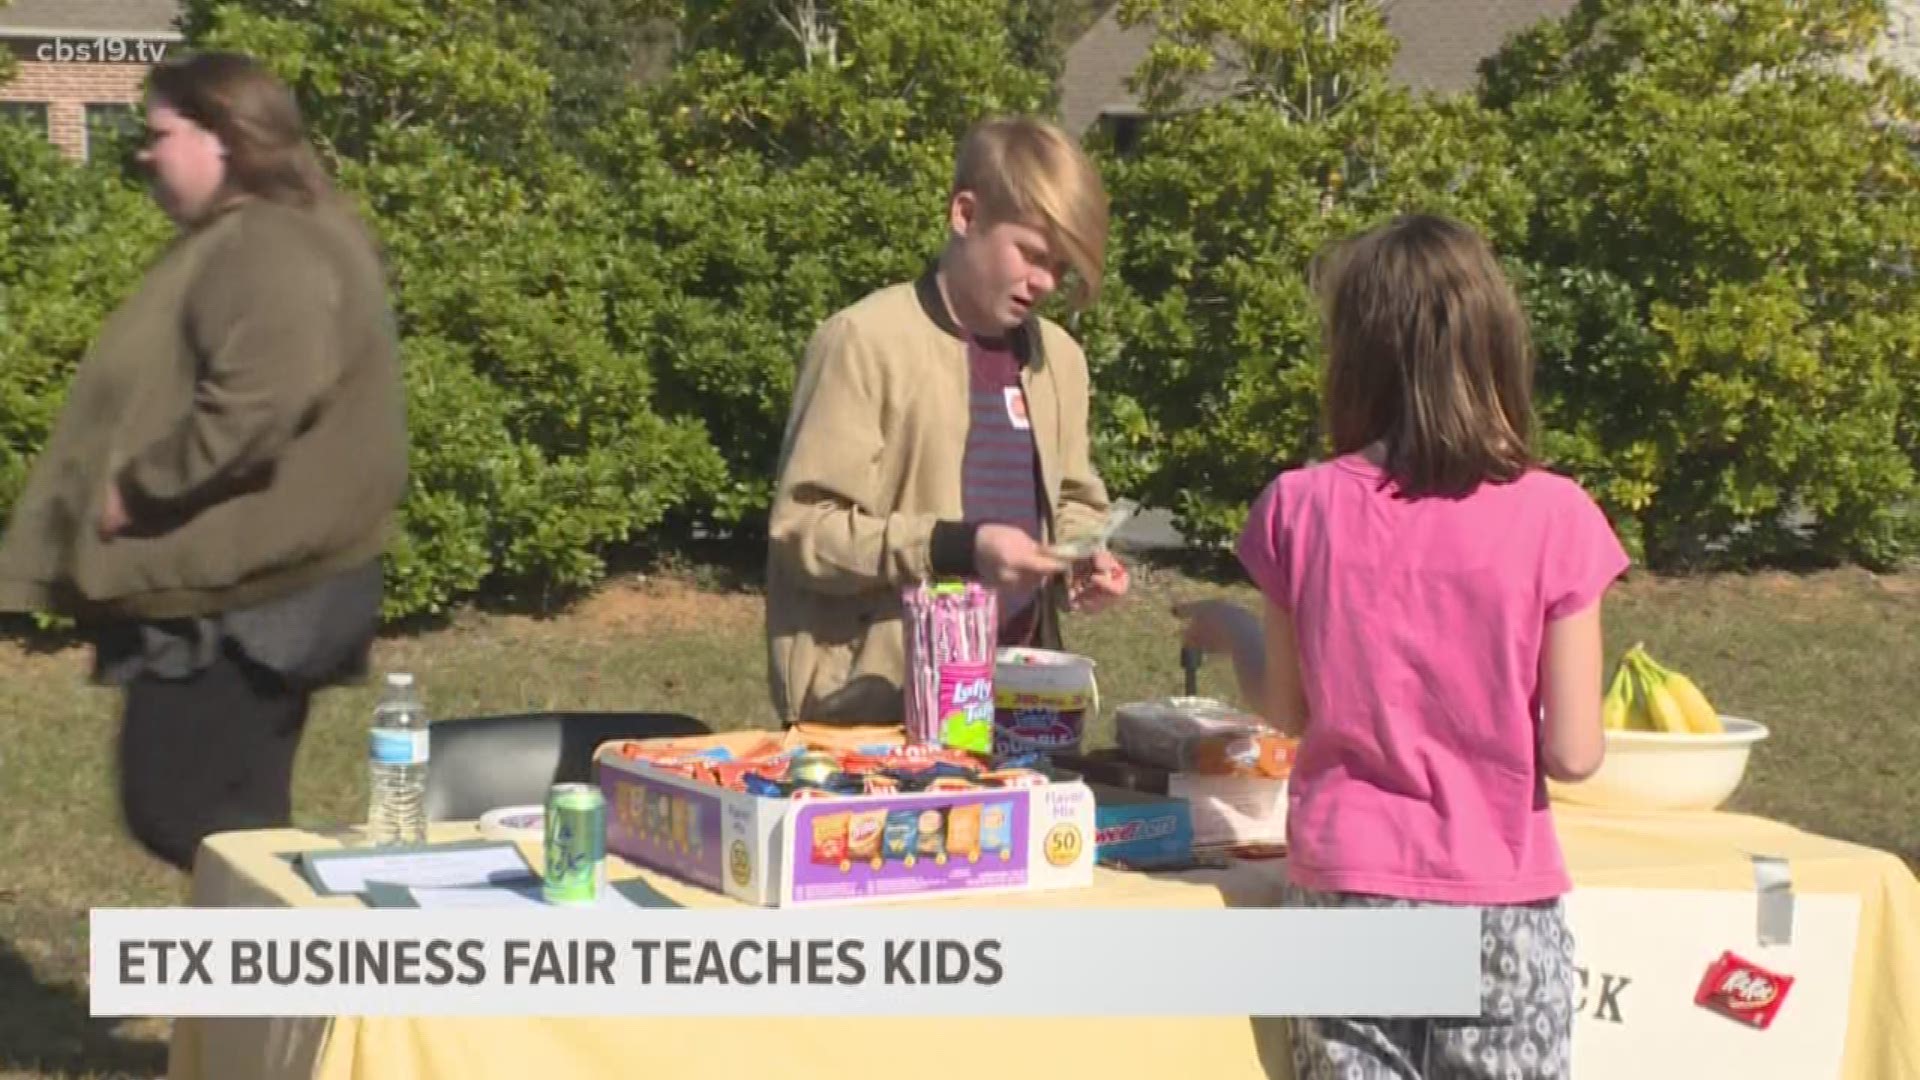 The Acton Academy Tyler had its first Children's Business Fair.